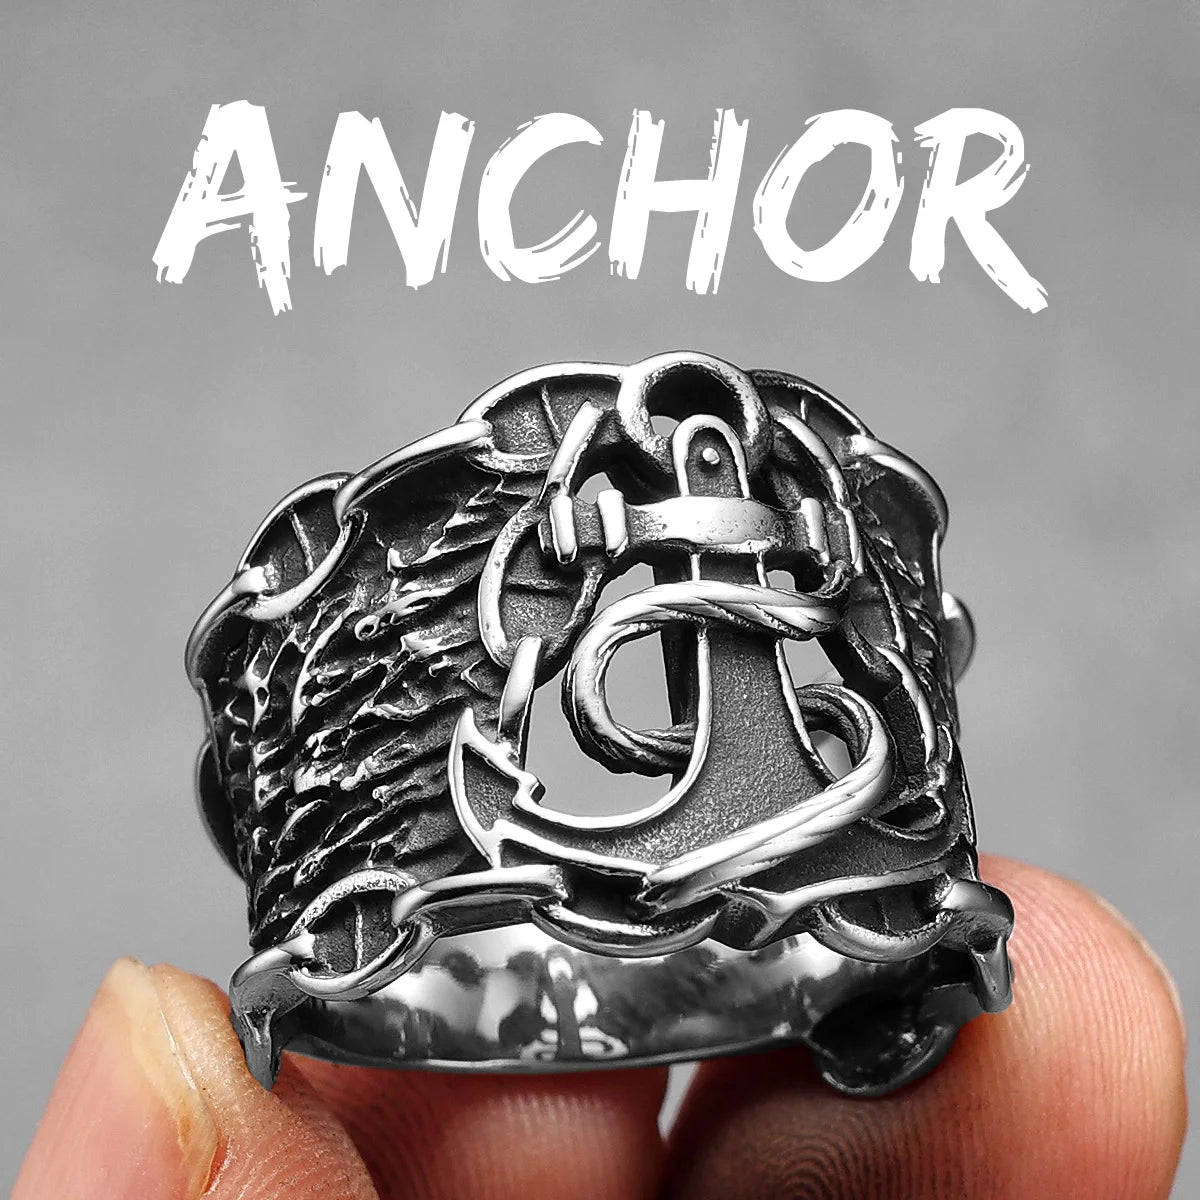 Anchor Lighthouse Ocean Sailor Ship Men Rings Stainless Steel Women Jewelry Vintage Punk Rock Fashion Accessories Gift R1196-Anchor